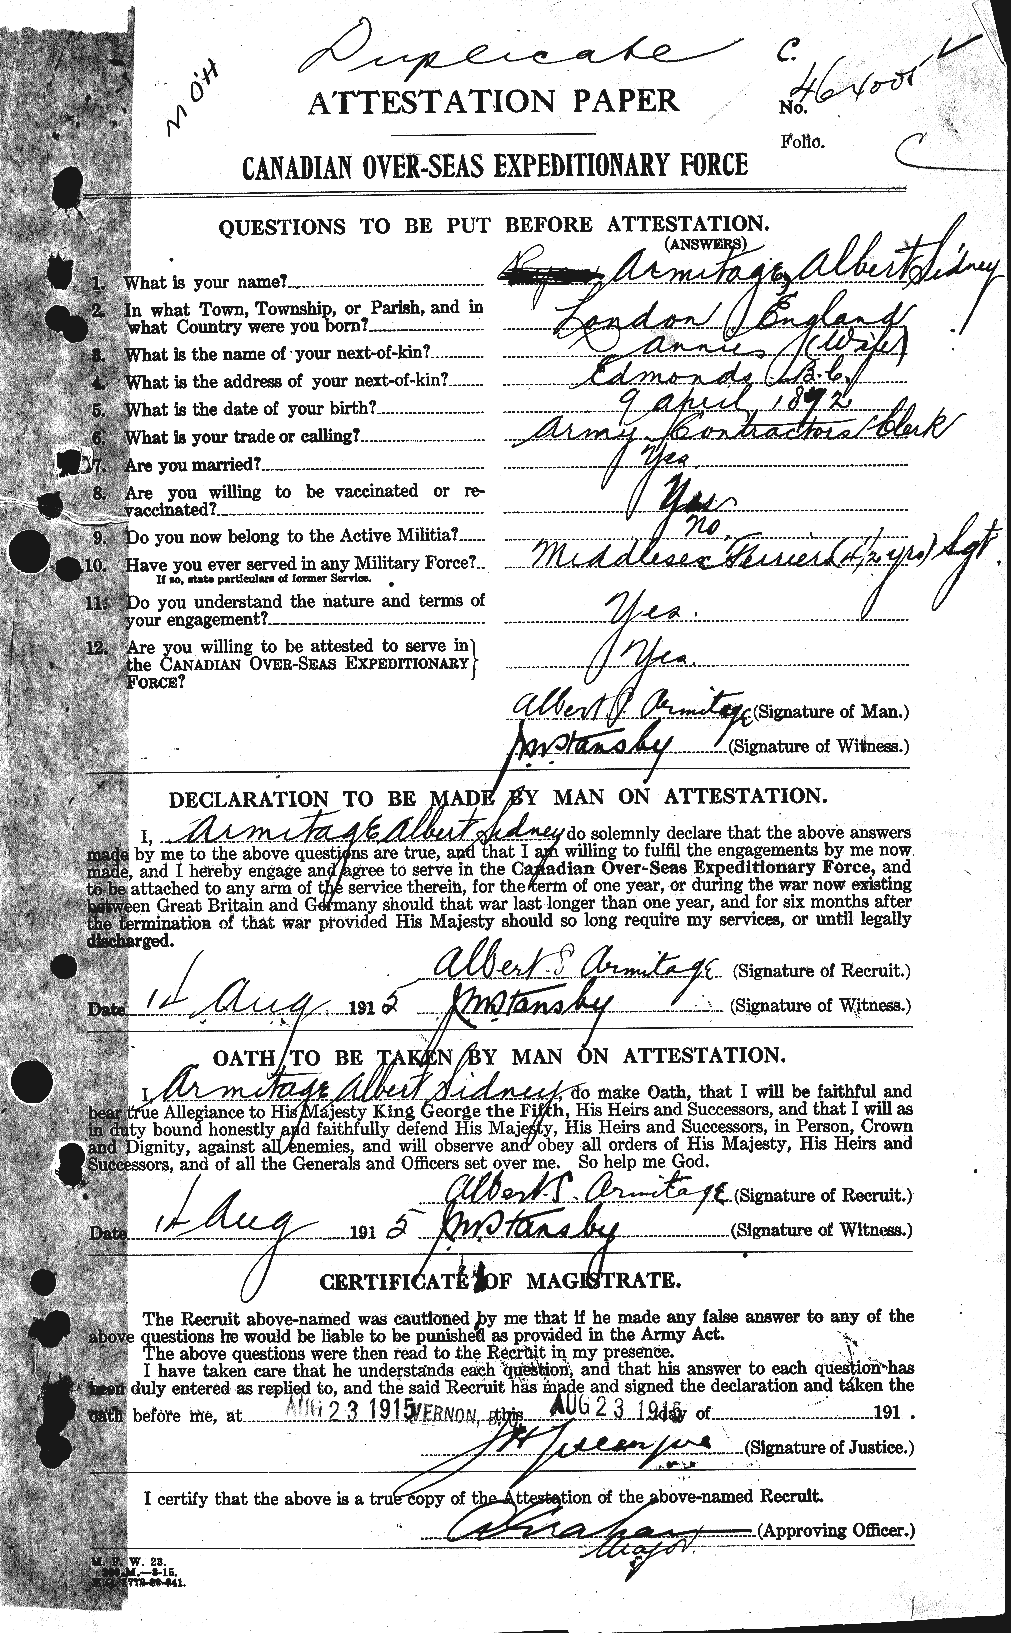 Personnel Records of the First World War - CEF 213449a